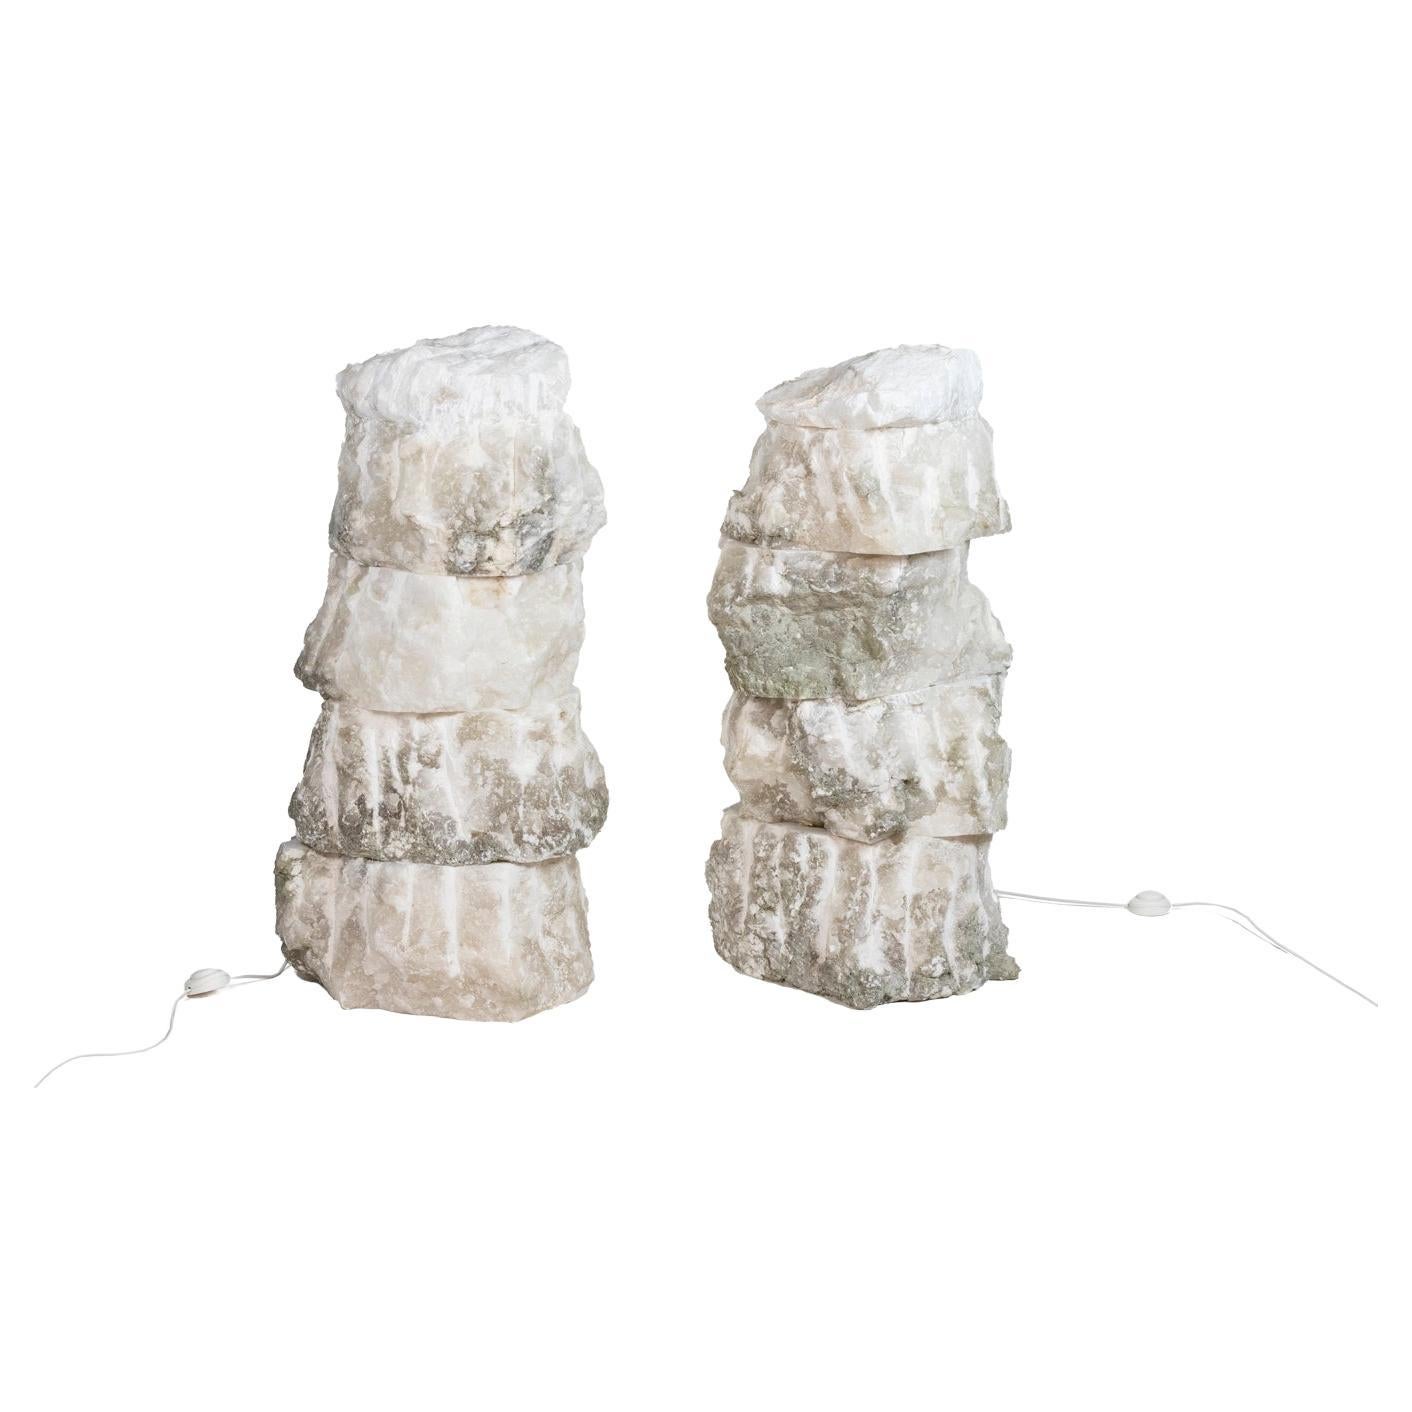 Pair of Lamps in Alabaster, Contemporary Work